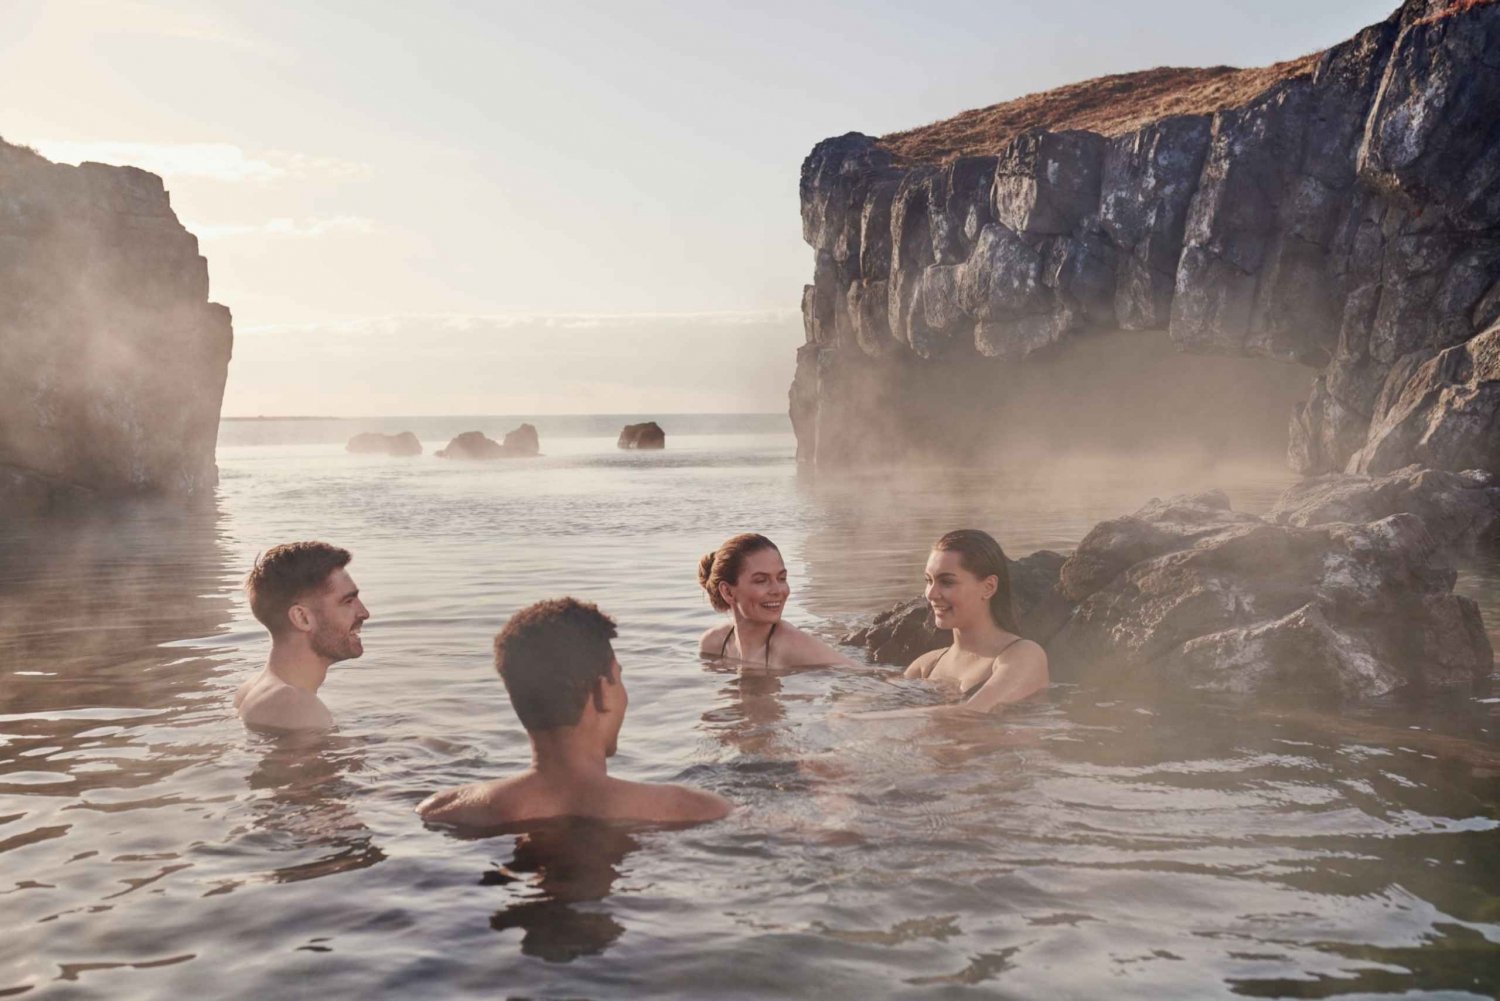 From Reykjavik: Golden Circle Tour and Sky Lagoon Bath